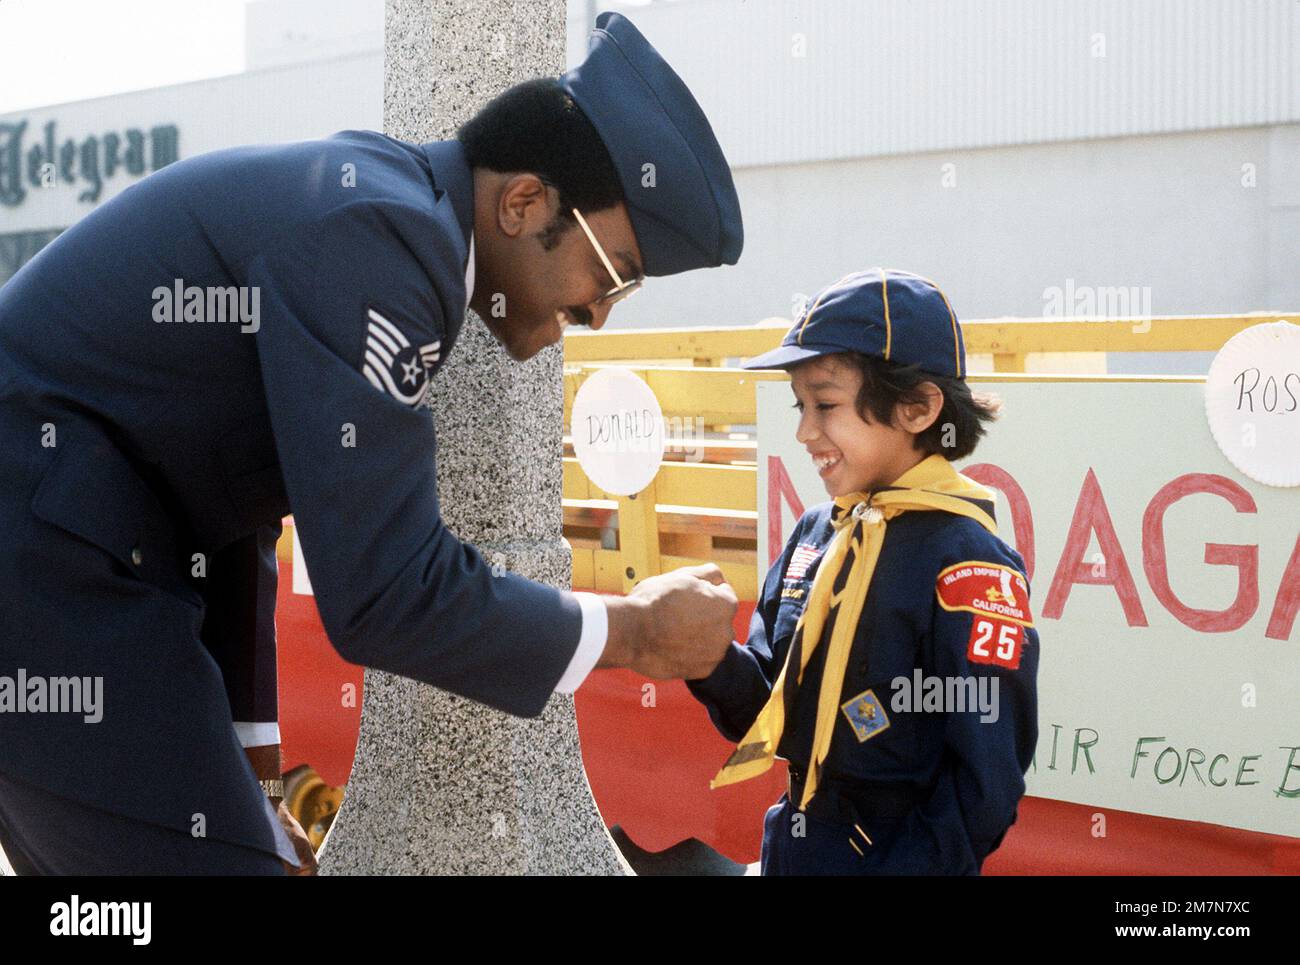 MASTER Sgt. Gary Kelly, a member of the Non-Commissioned Officers Academy Graduates Association (NCOAGA), meets cub scout Freddie Rodriguez. Base personnel helped handicapped scouts participate in the annual National Orange Show Parade. Base: Norton Air Force Base State: California (CA) Country: United States Of America (USA) Stock Photo